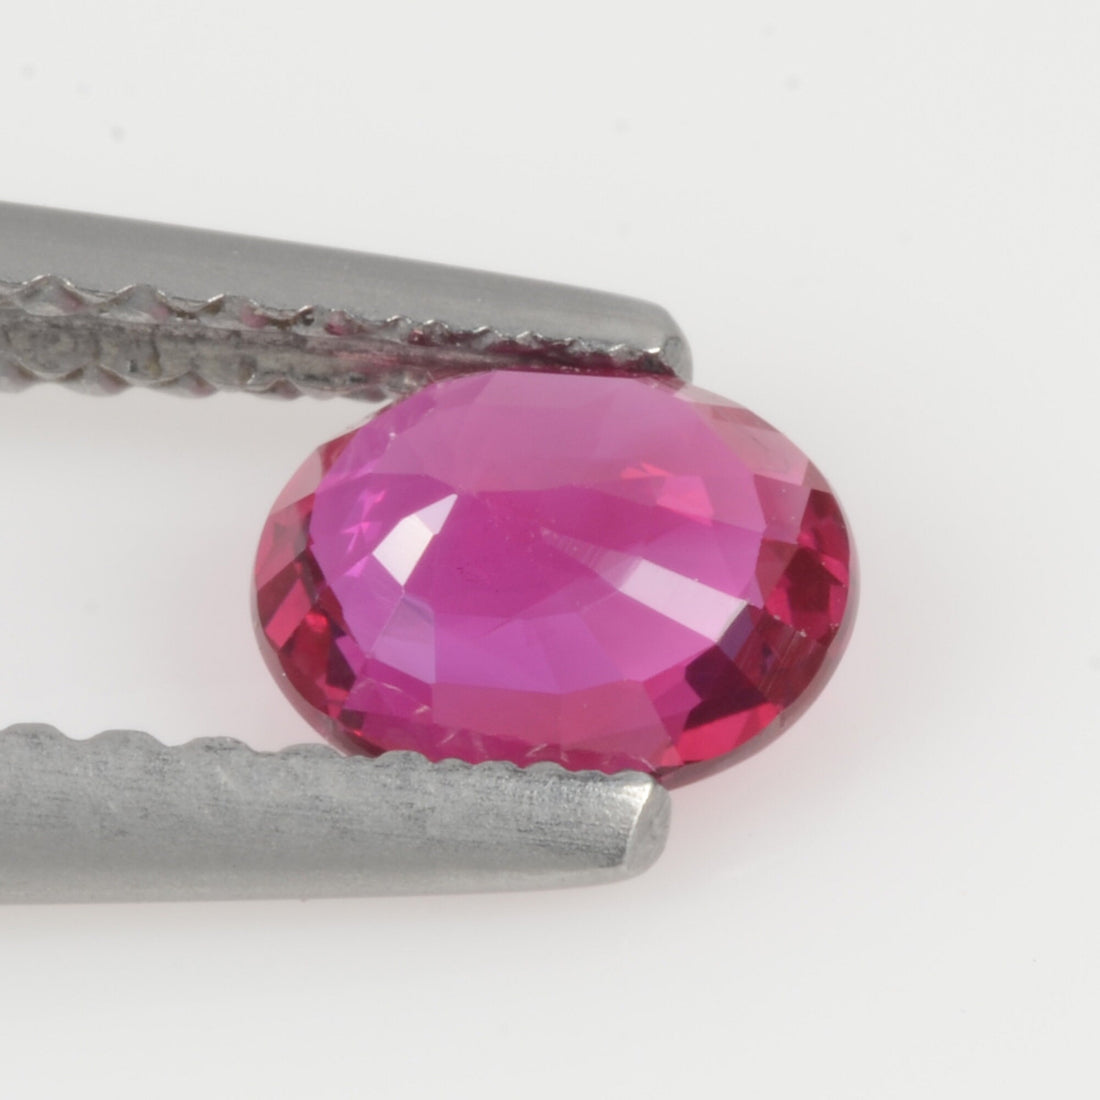 0.54 Cts Natural Ruby Loose Gemstone Oval Cut